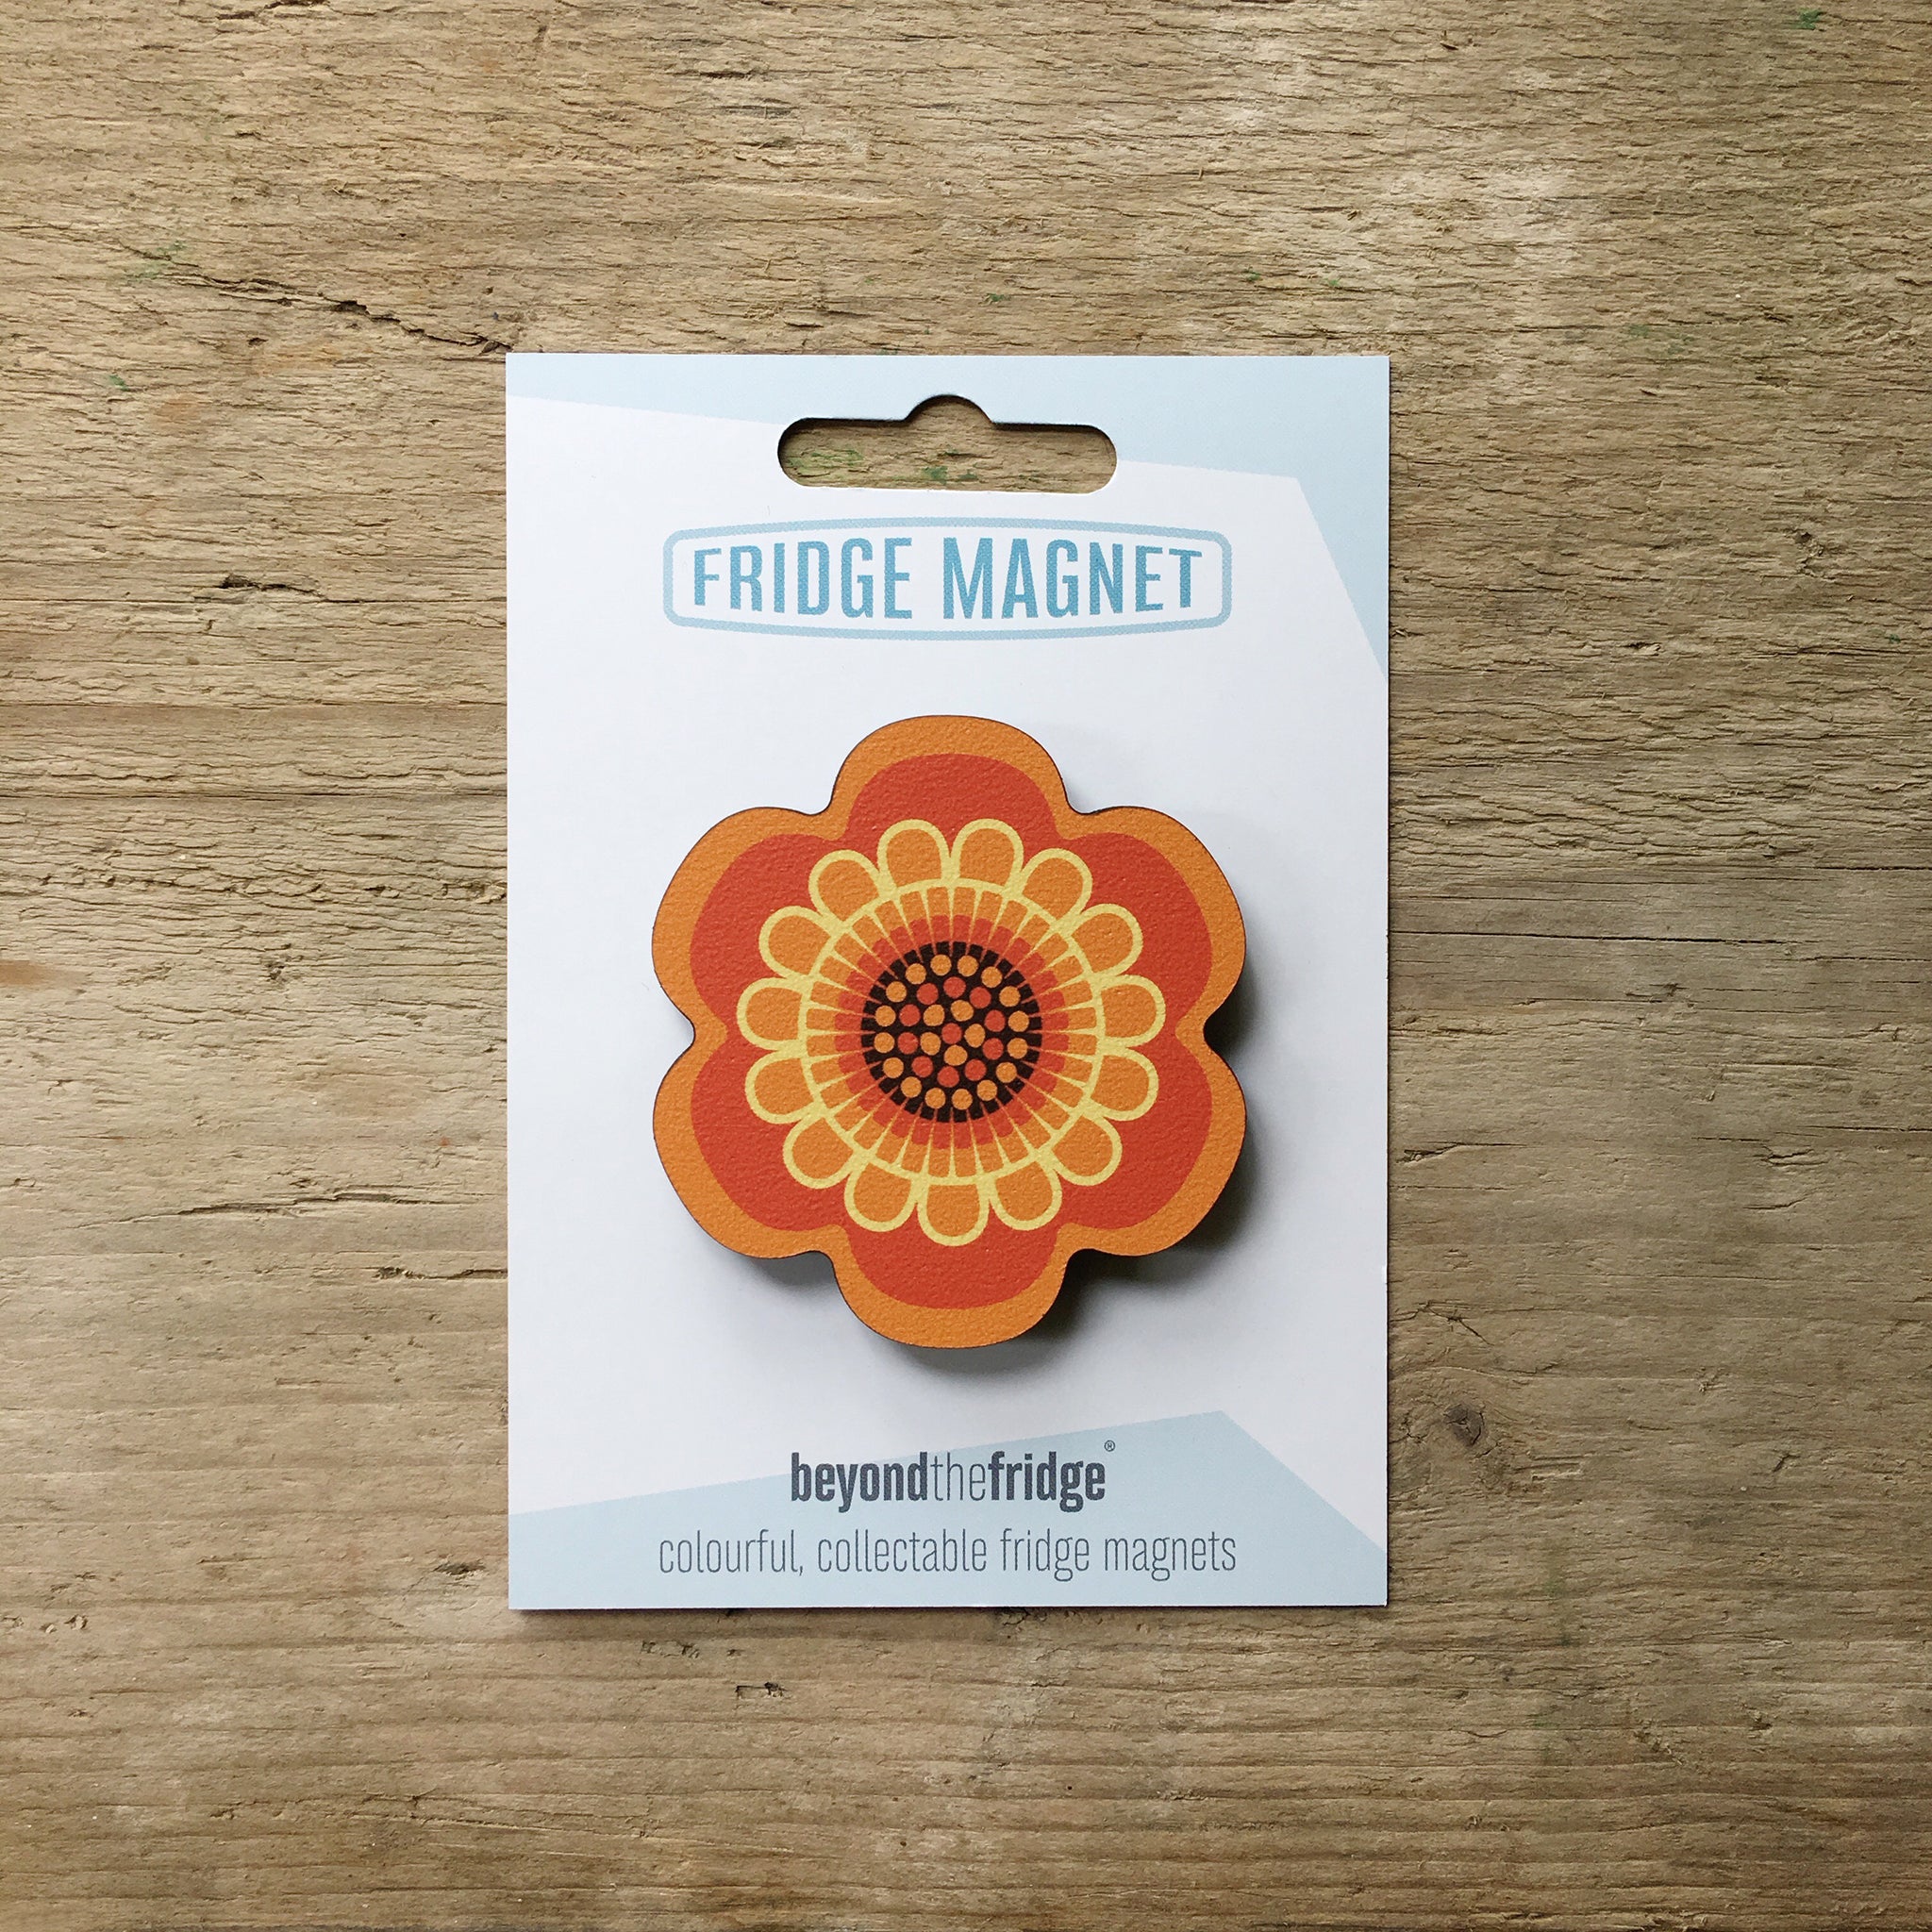 A orange flower design plywood fridge magnet by Beyond the Fridge in it’s pack on a wooden background